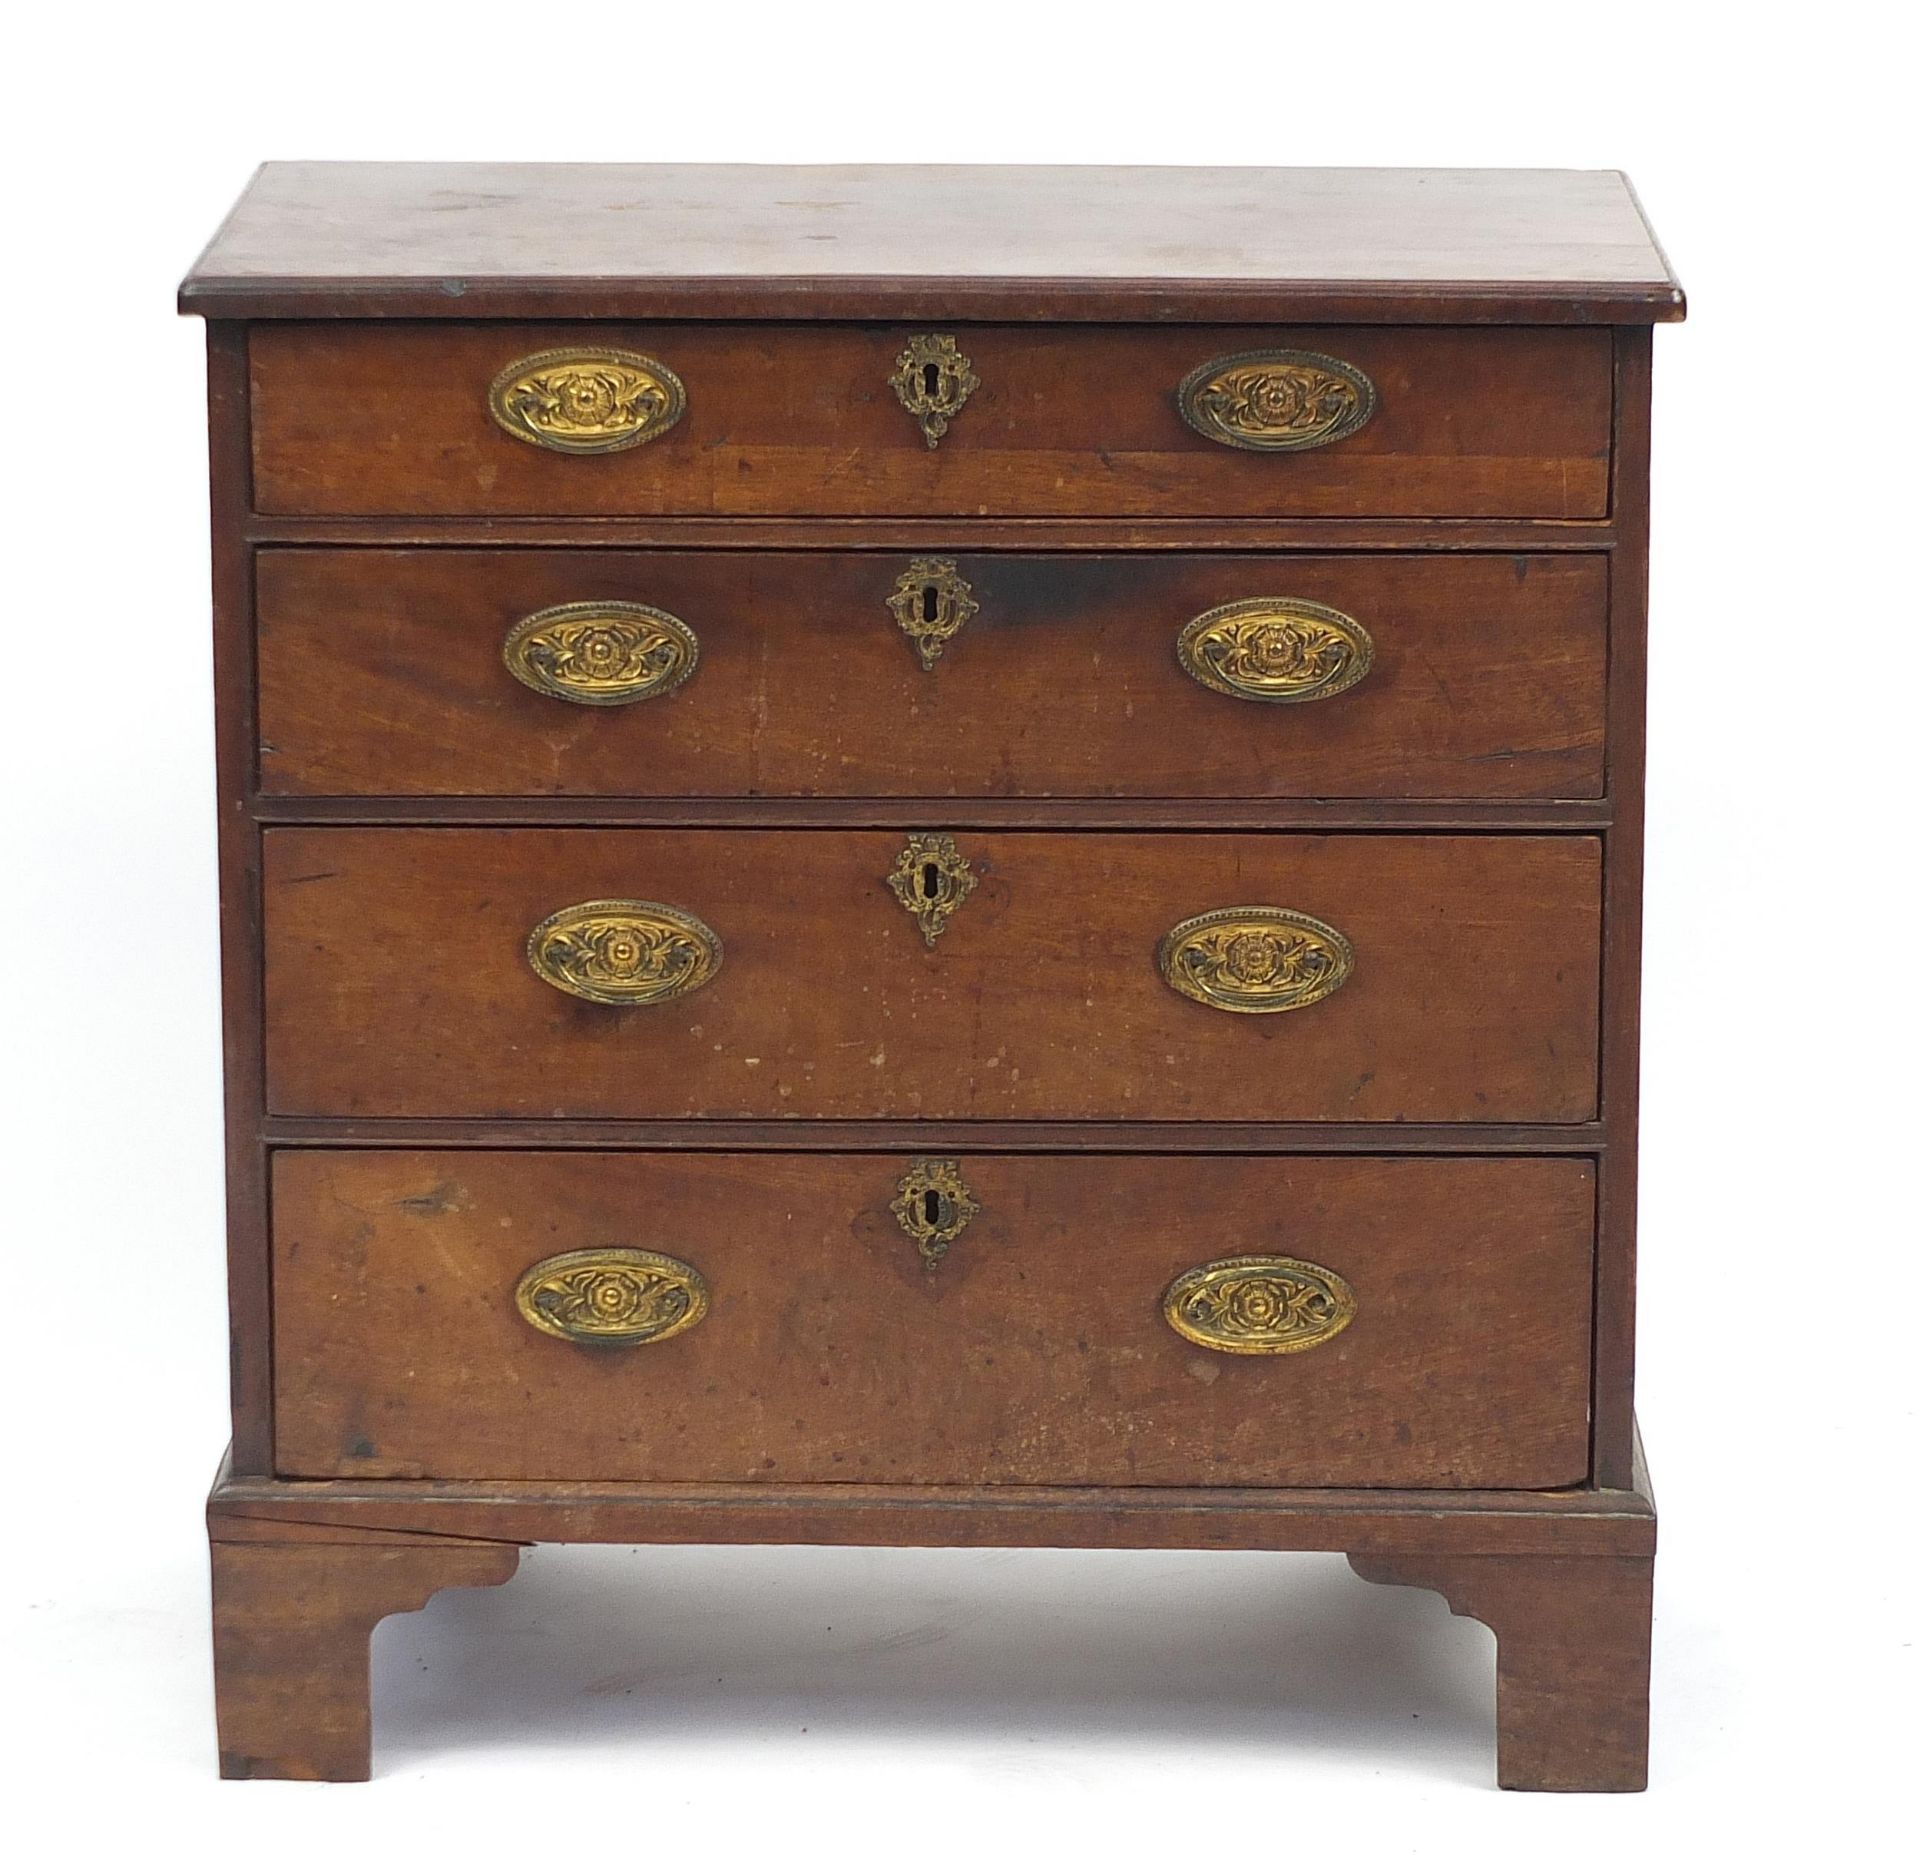 Georgian four drawer chest with brass handles and bracket feet, 78cm H x 74cm W x 42cm D - Image 2 of 4